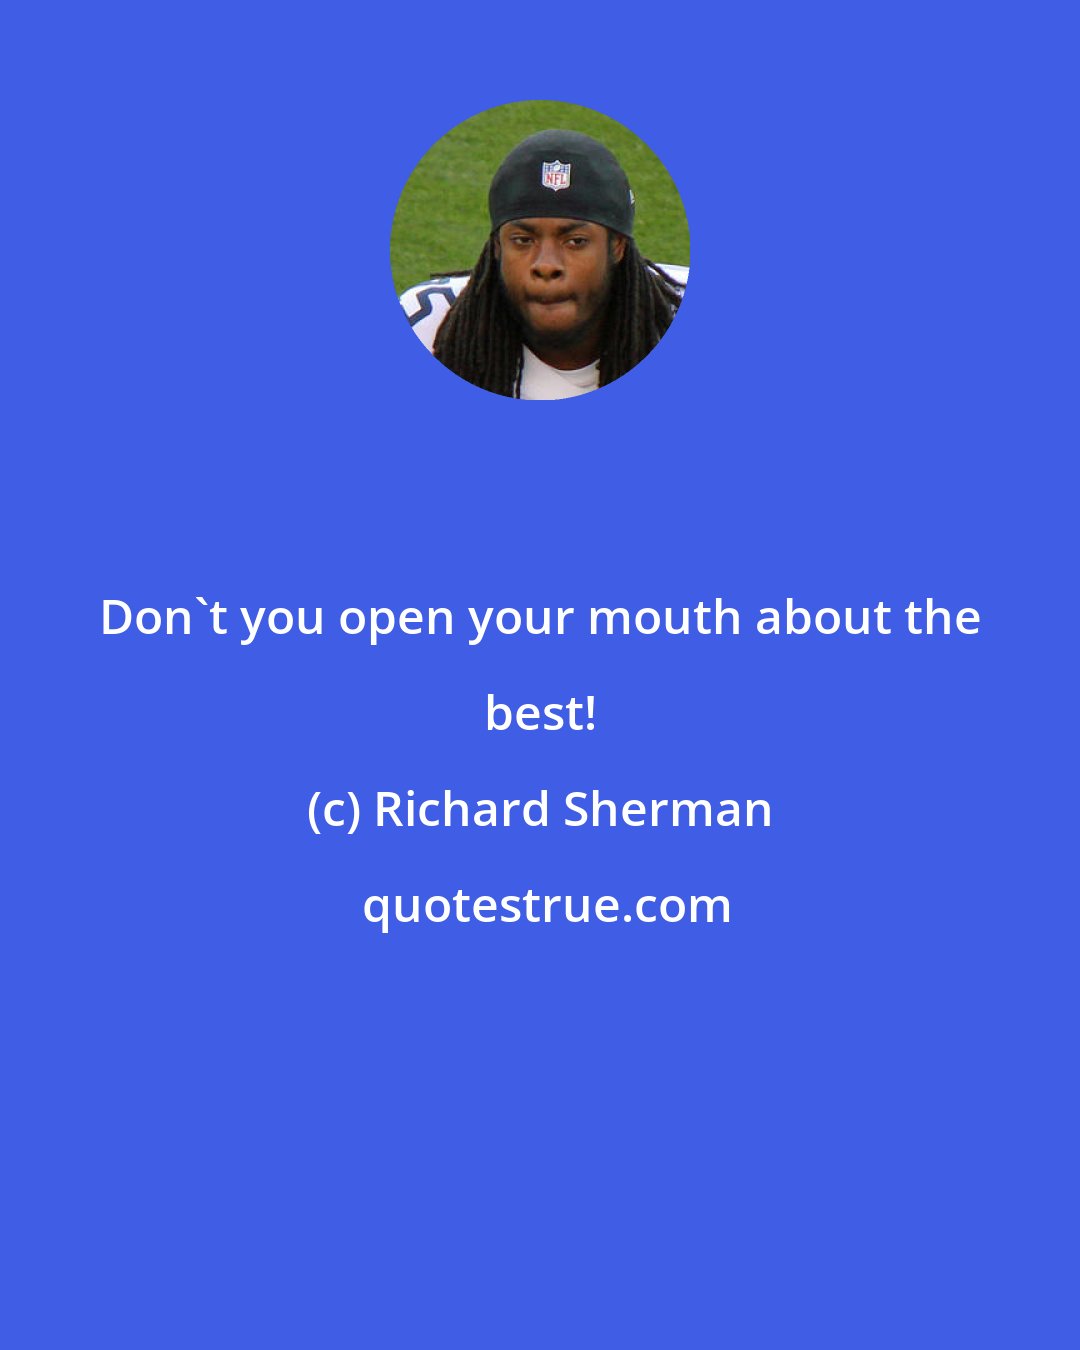 Richard Sherman: Don't you open your mouth about the best!